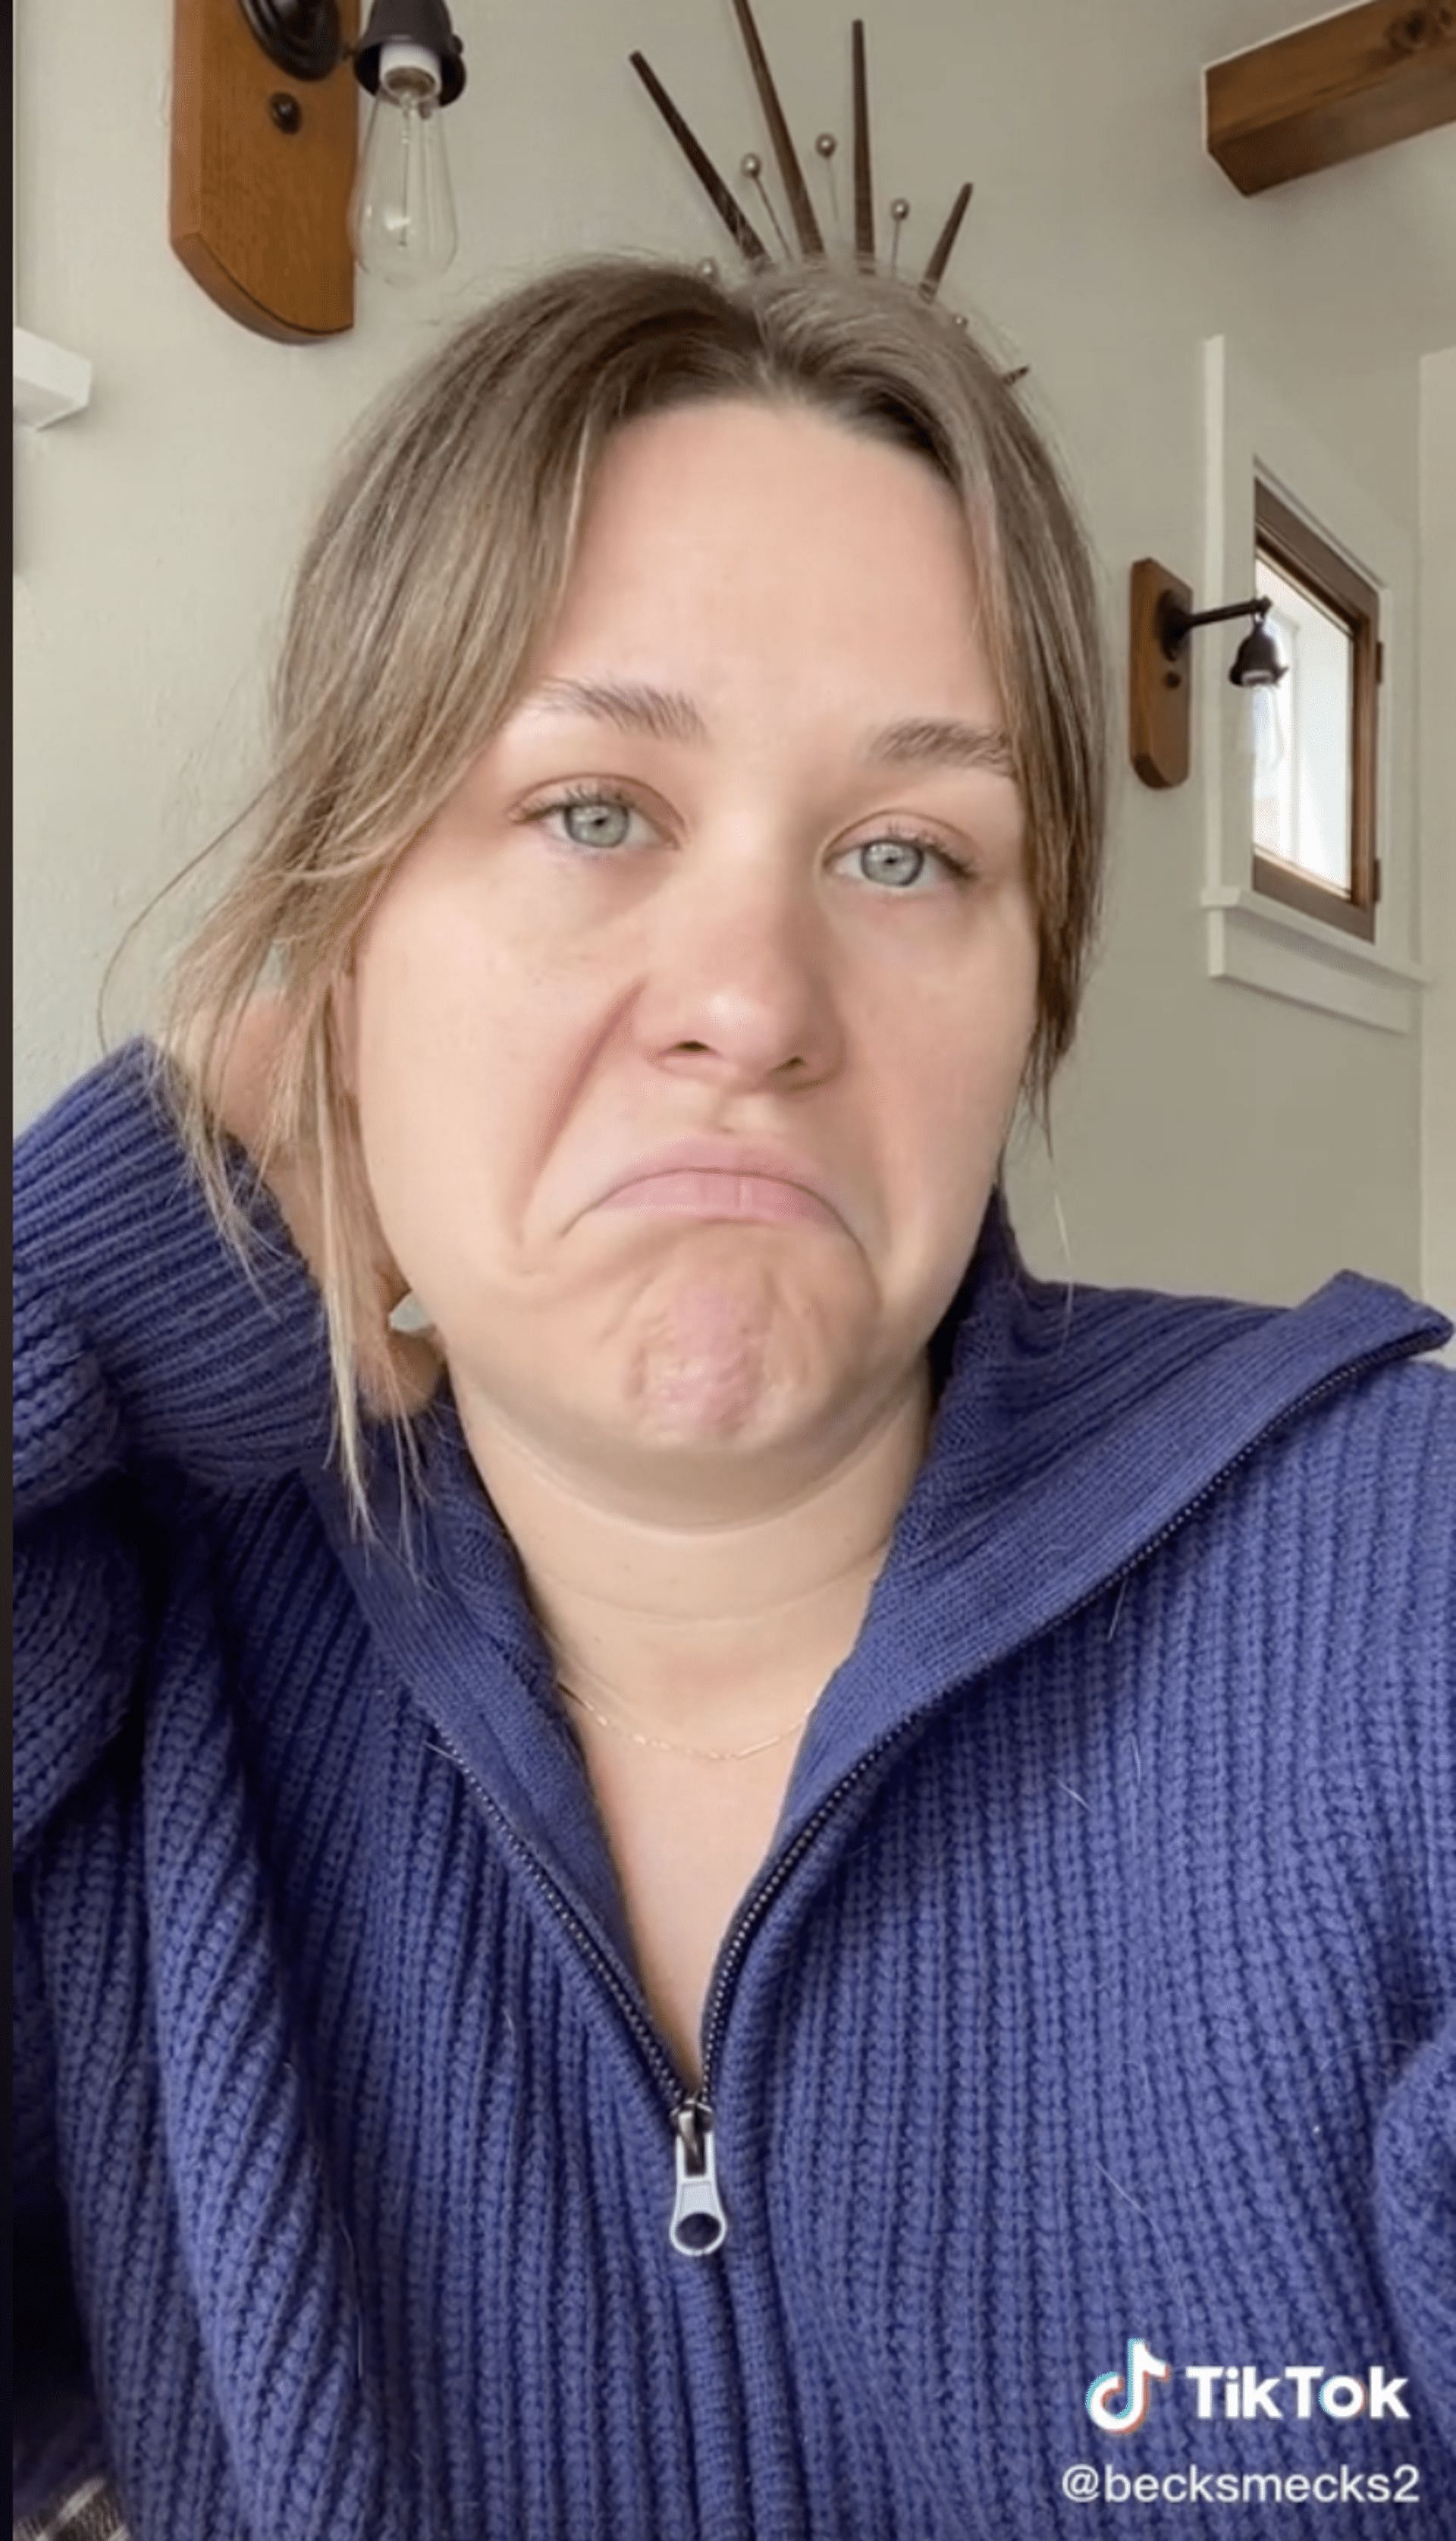 Becky uploads a video where she is seen &quot;frowning&quot; on the whole situation. (Image via TikTok/becksmecks2)